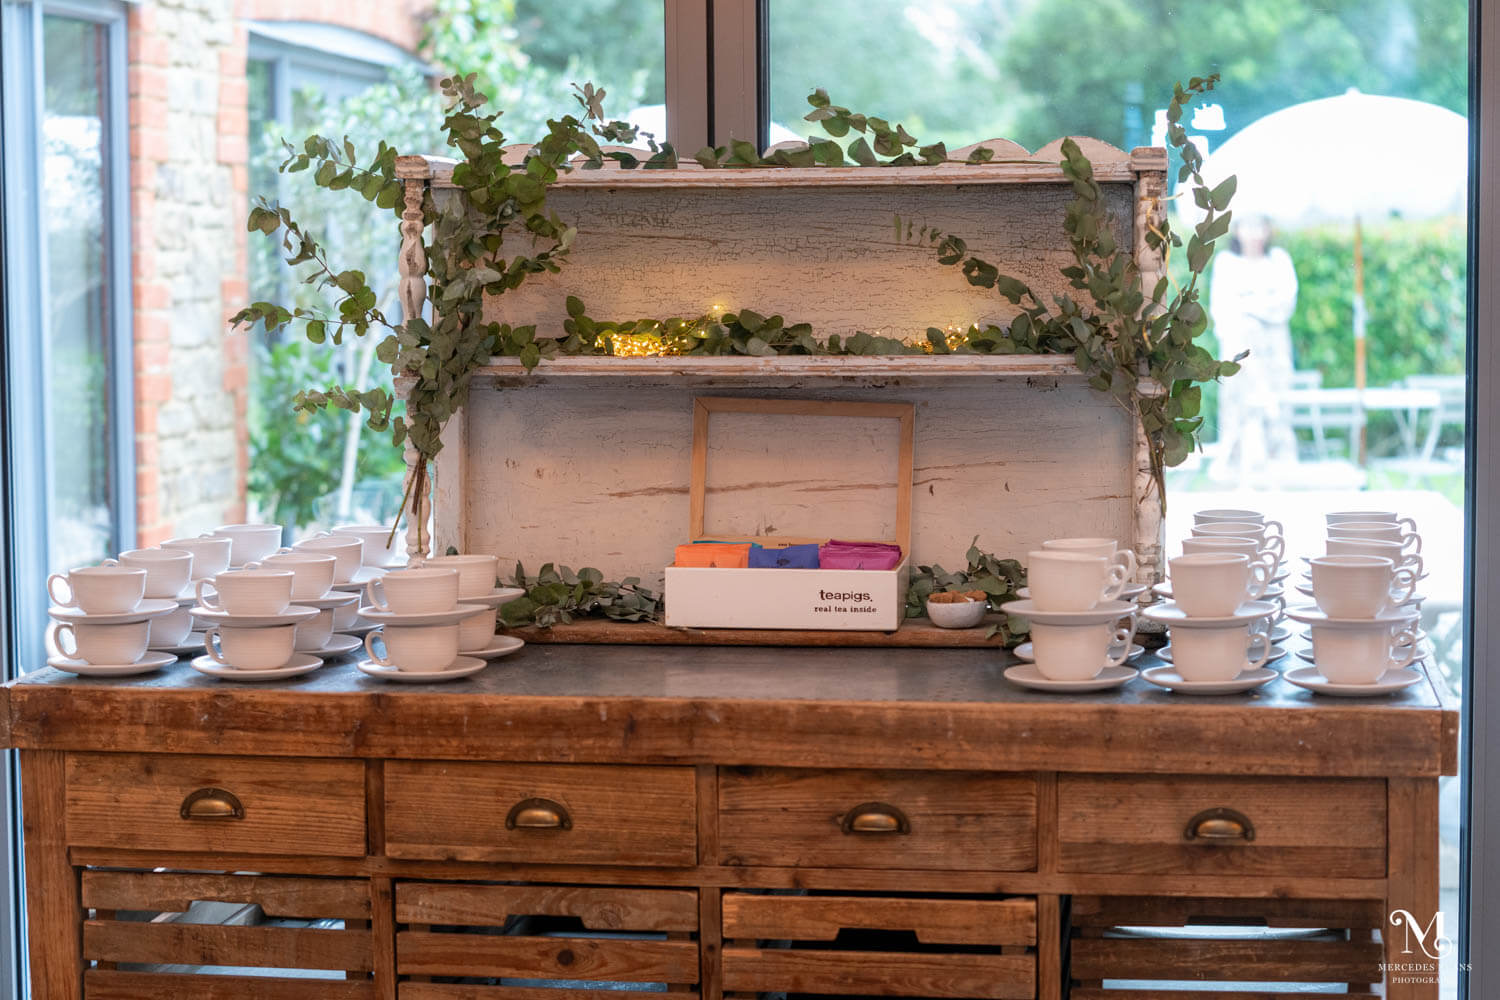 an old oak dresser serves as tea and coffee station, it's decorated with eucalyptus leaves and twinkling fairy lights